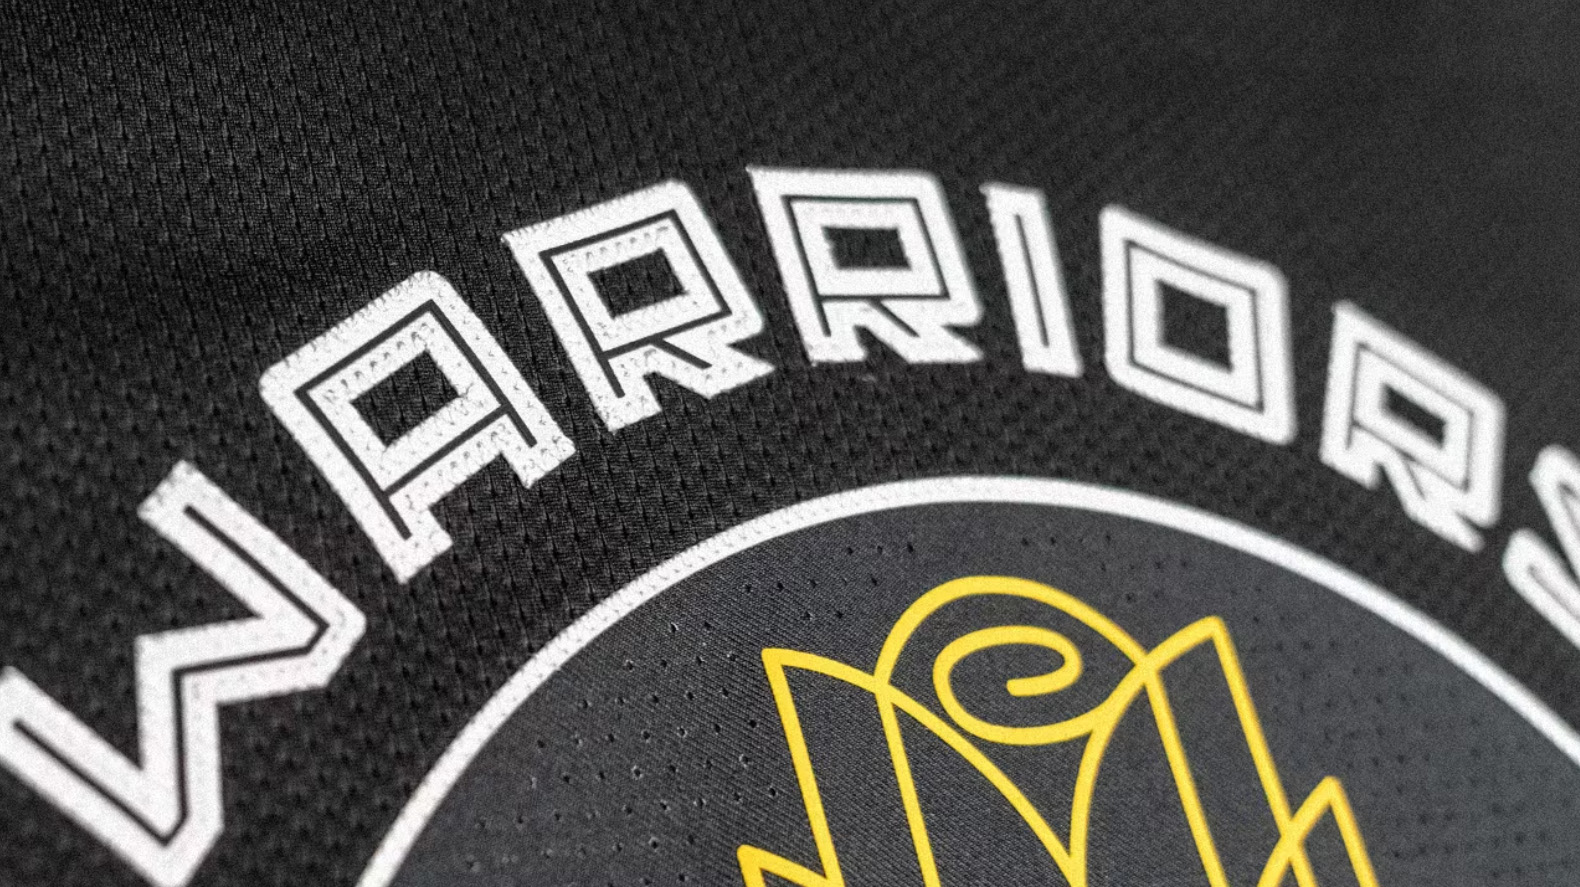 Warriors Unveil 2022-23 Nike NBA City Edition Uniform; Launch 'Empowered,  Presented by Rakuten' Campaign